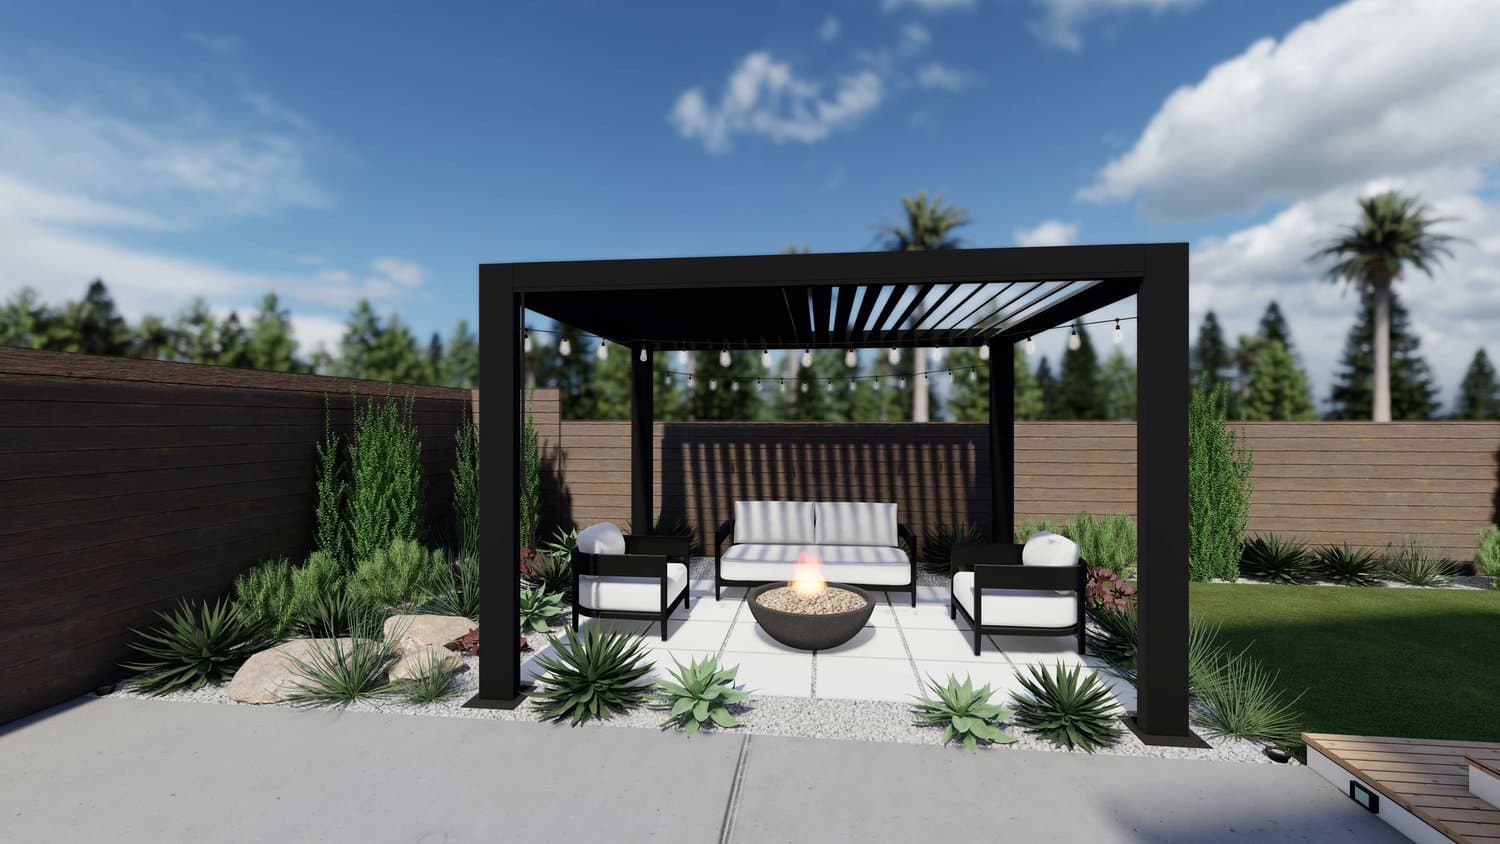 Los Angeles paver patio with pergola over fire pit seating area, alongside drought tolerant plants, grass, gravel, and boulder stone